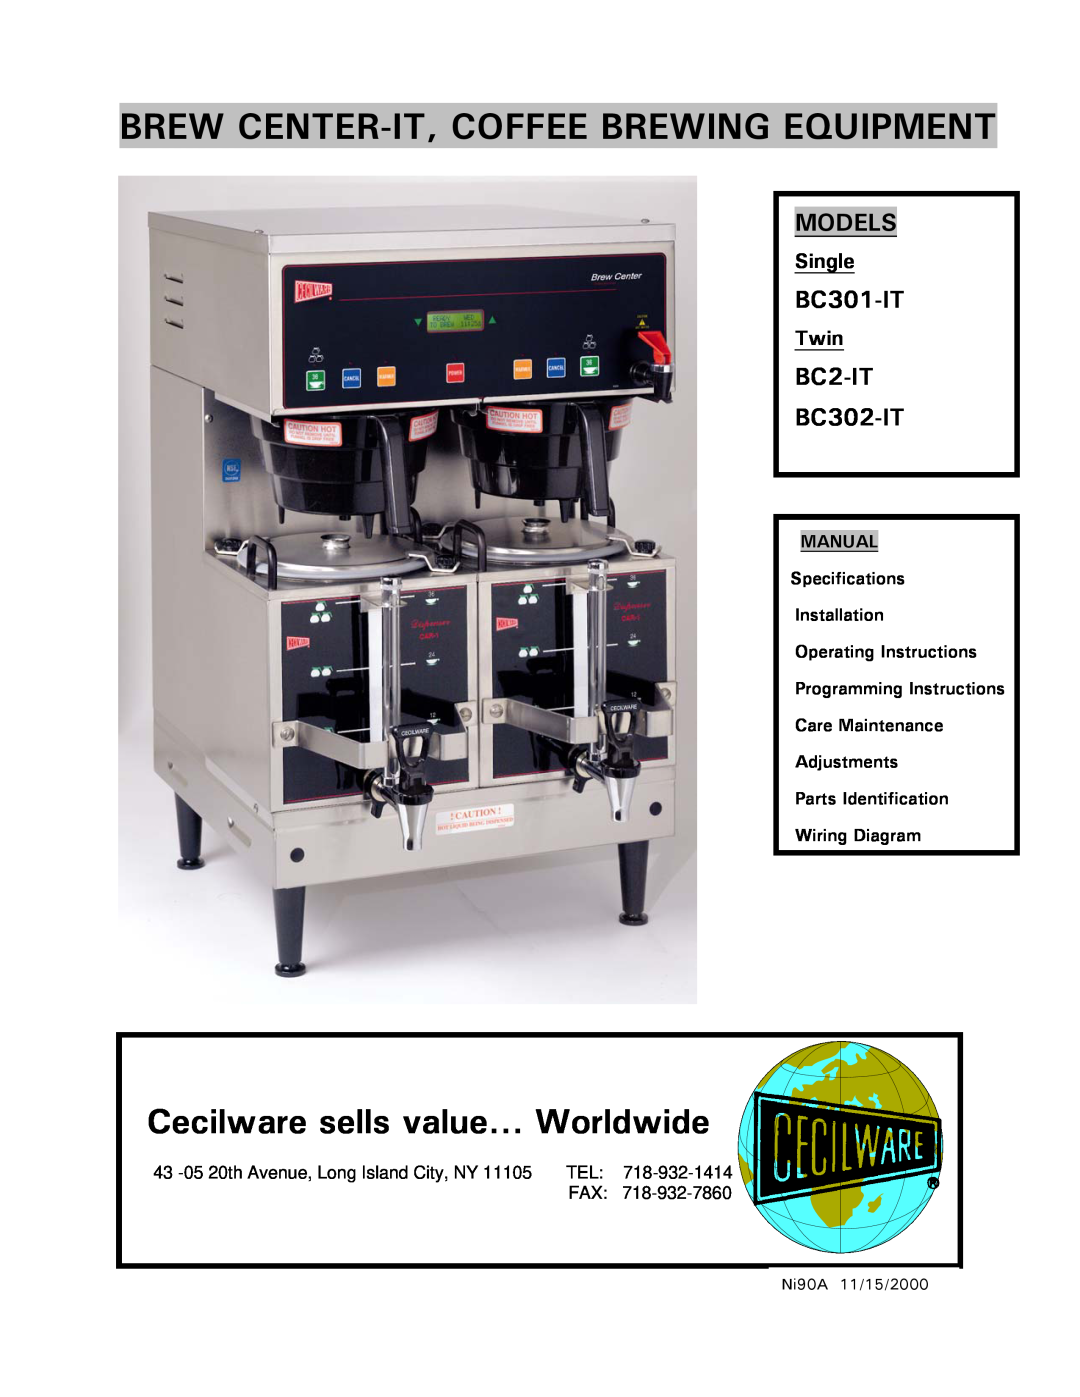 Cecilware BC301-IT specifications Models, BC2-IT BC302-IT, Single, Twin, Brew Center-It, Coffee Brewing Equipment 